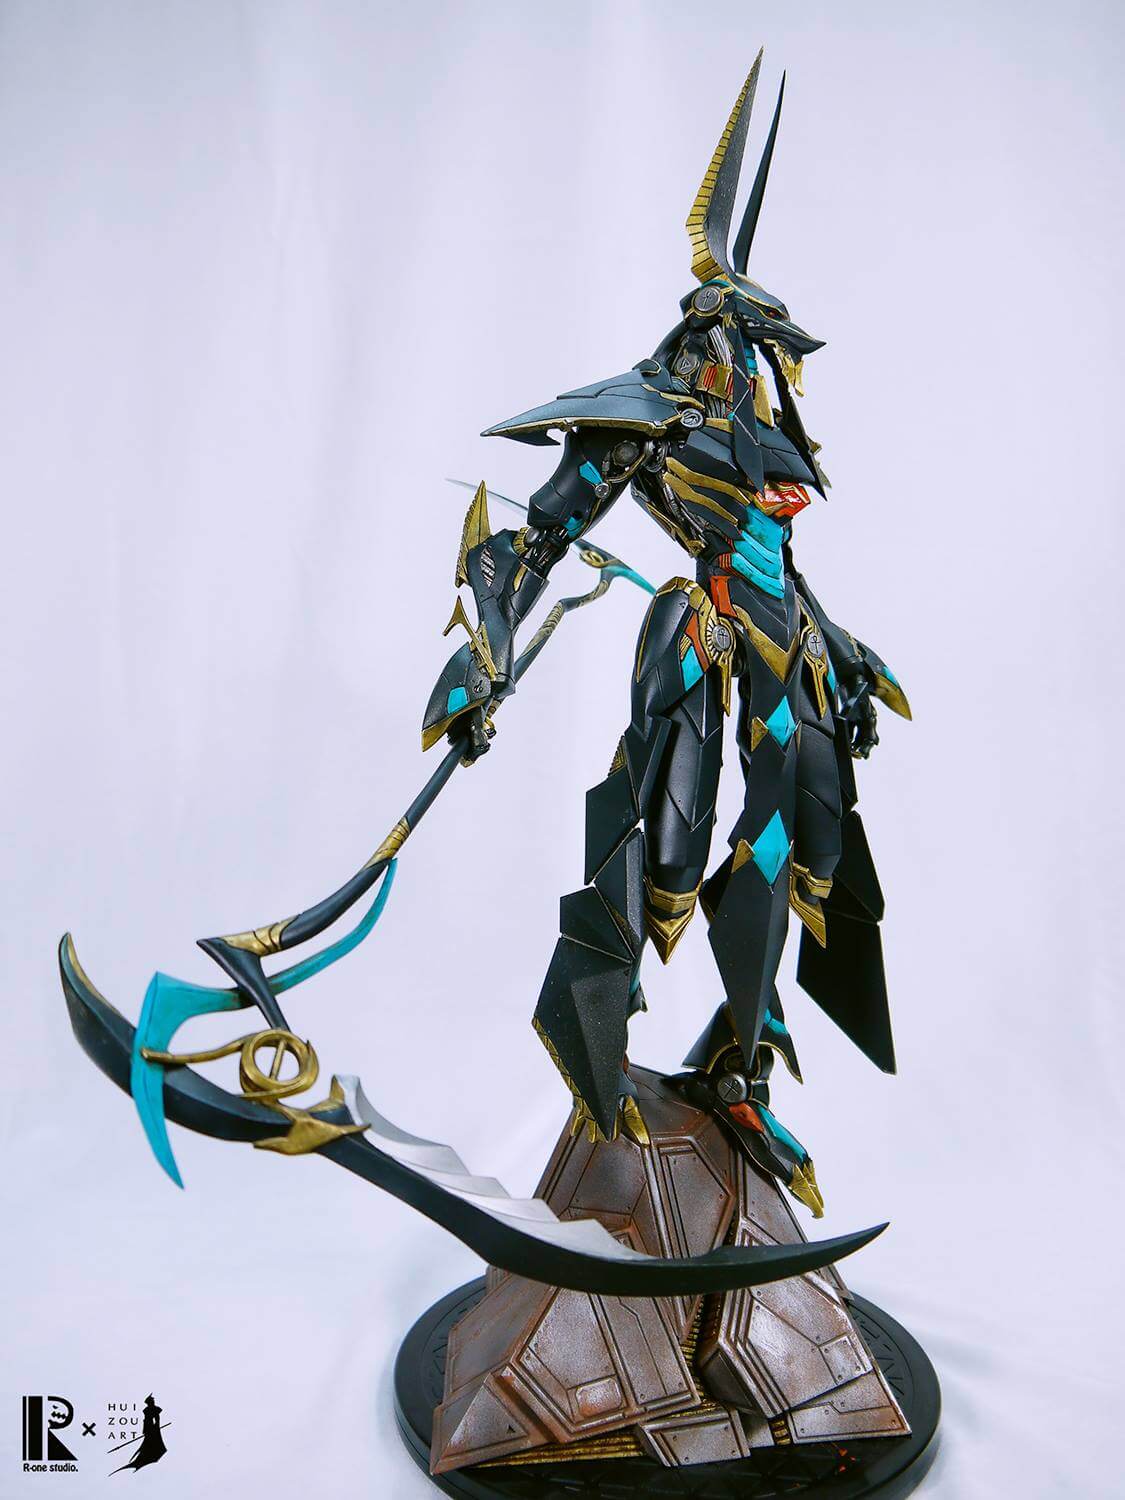 Undead Trial R-One The x Art - Toy Anubis Hui By Chronicle Studio Zou